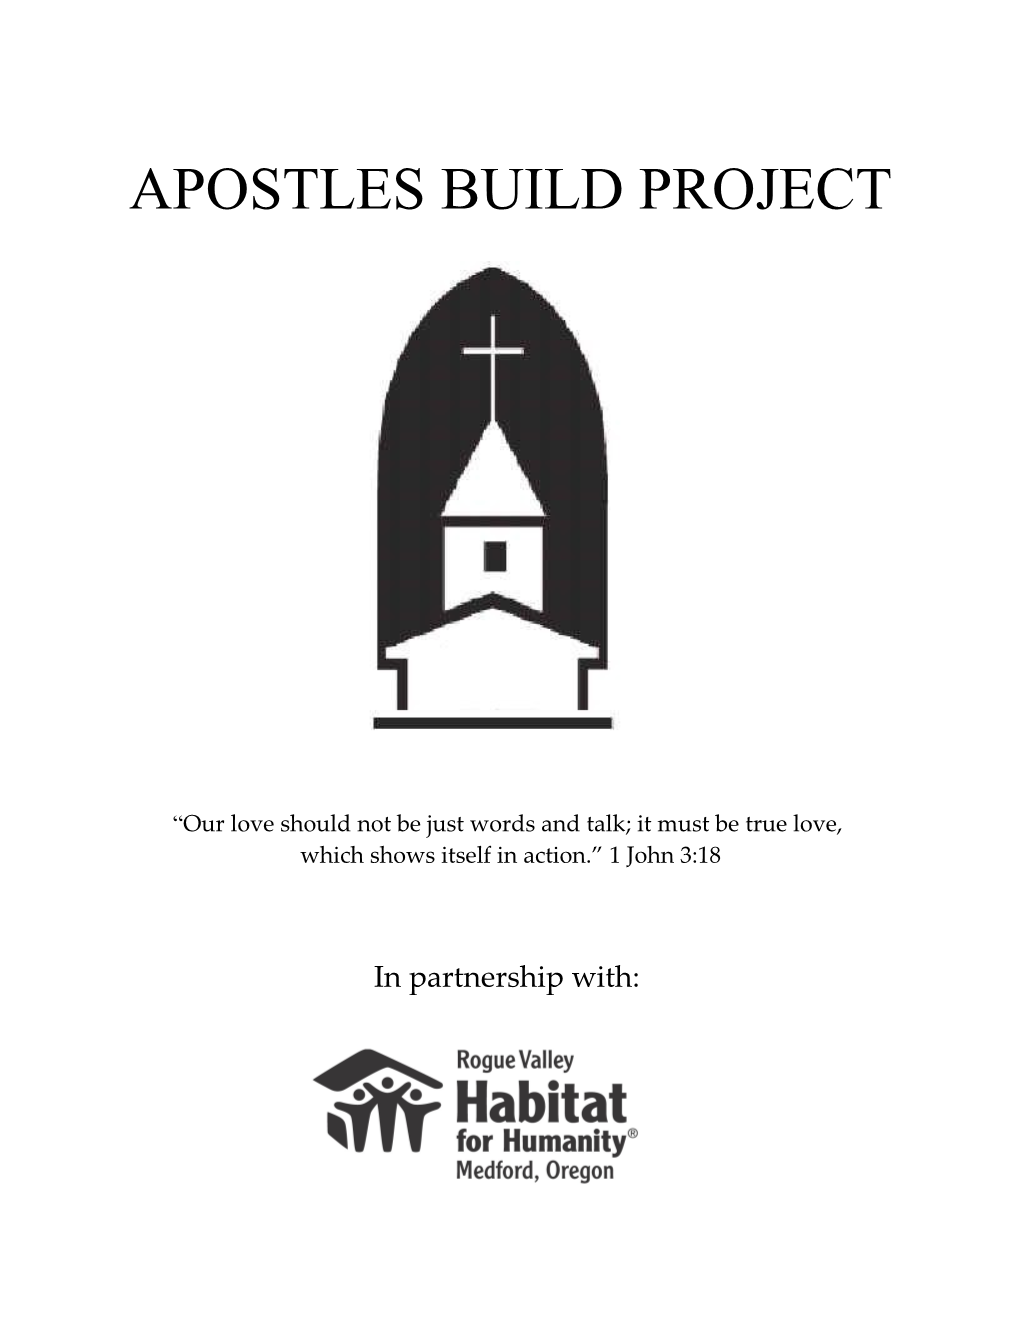 Apostles Build Project